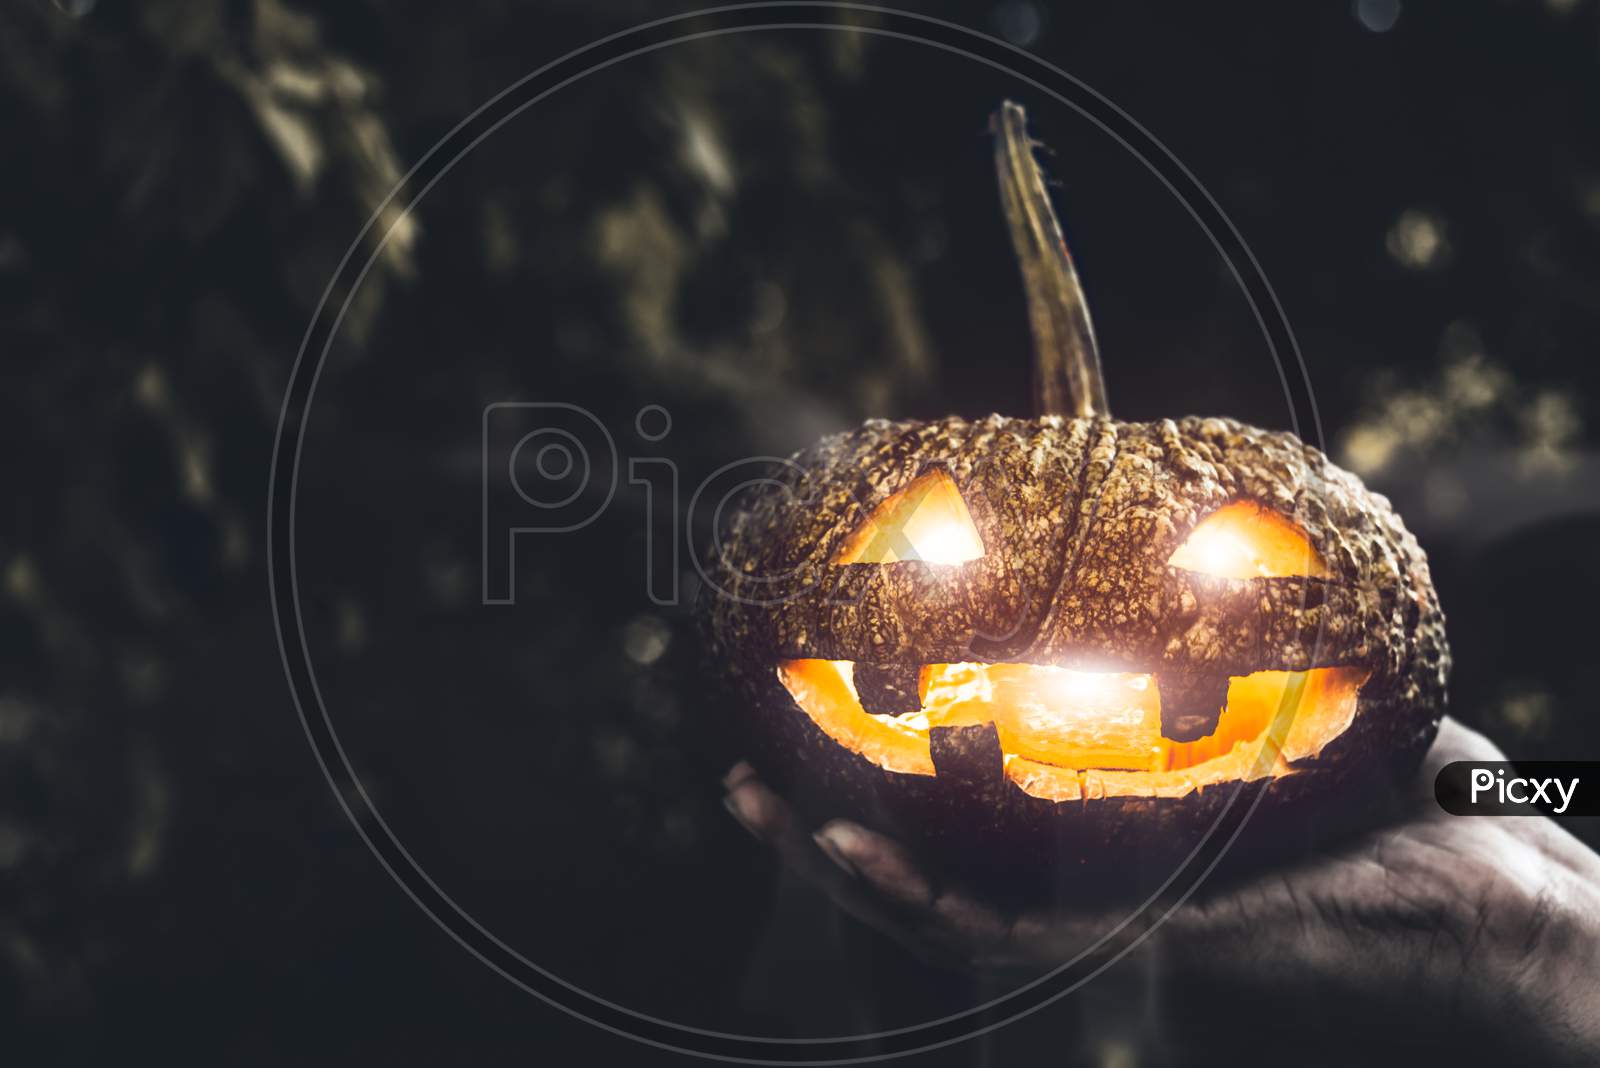 Halloween Pumpkin In Hand. Holiday And Religion Concept. Ghost In Pumpkin Theme. Witchcraft And Mystery Spell Theme.